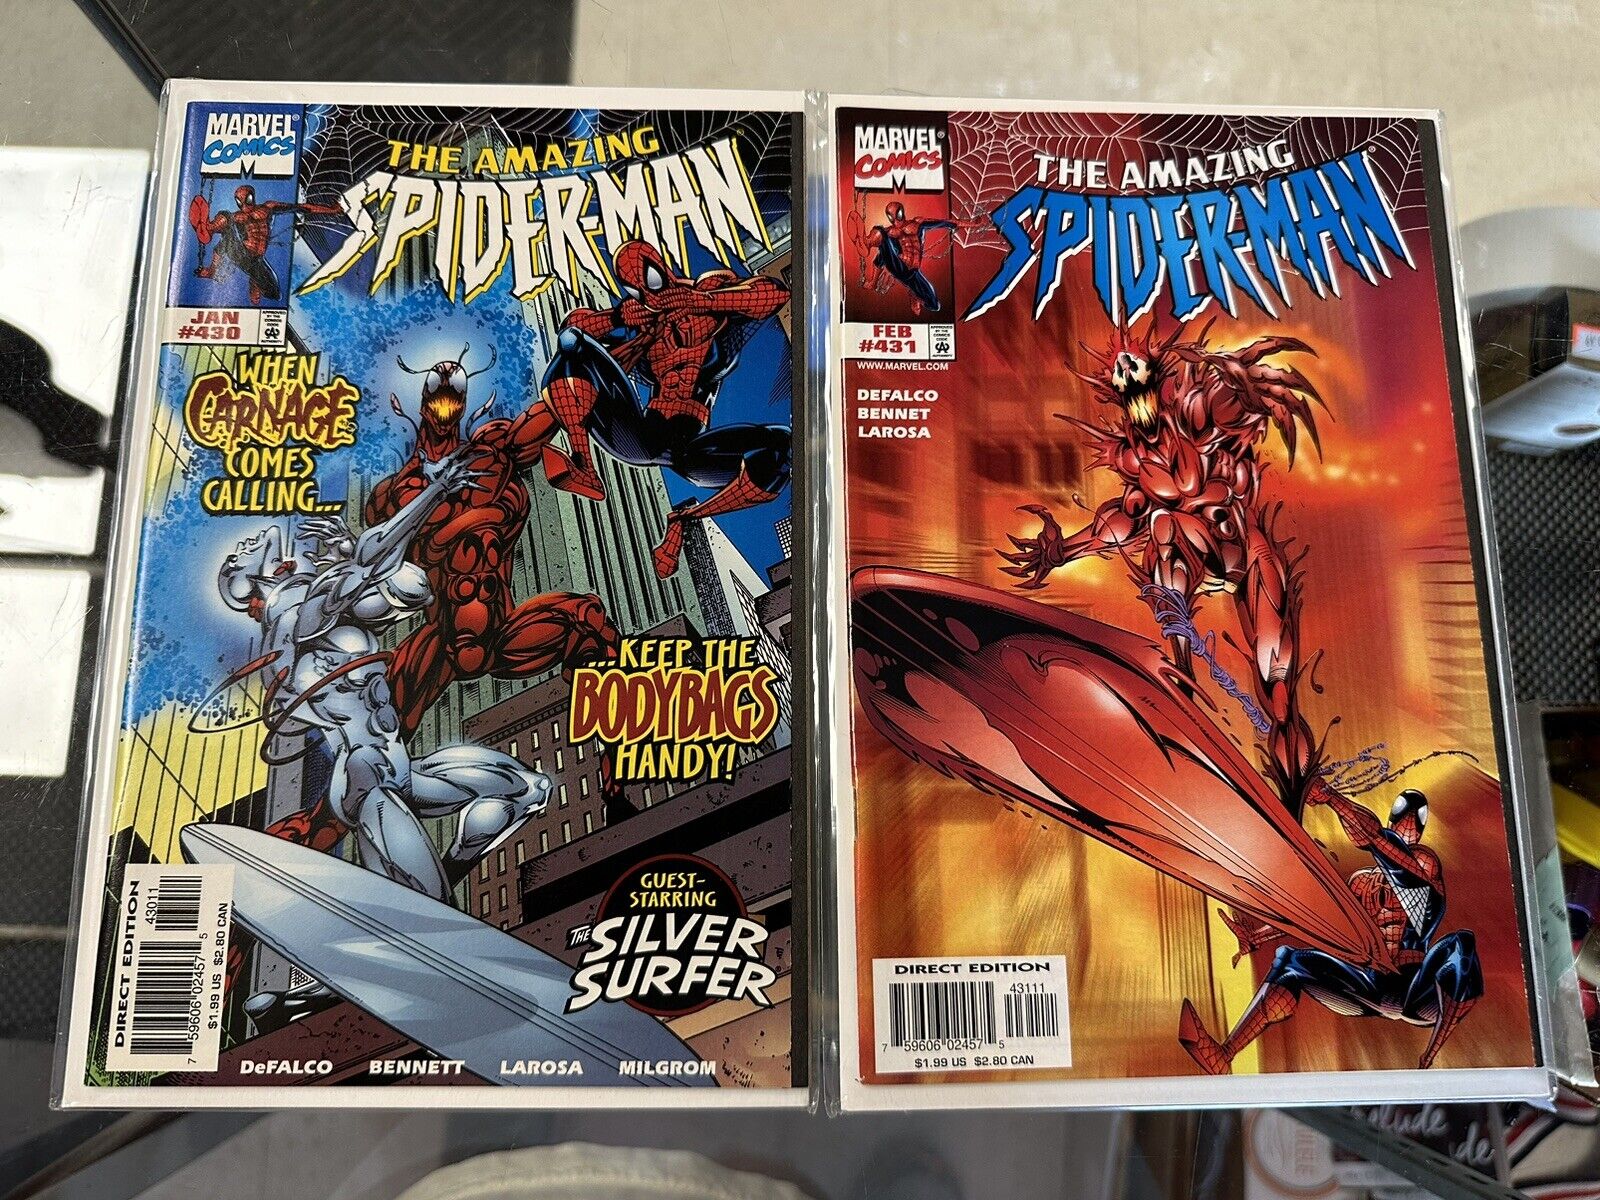 Amazing Spider-Man #430 & #431 (1998) Carnage & Silver Surfer Appearance